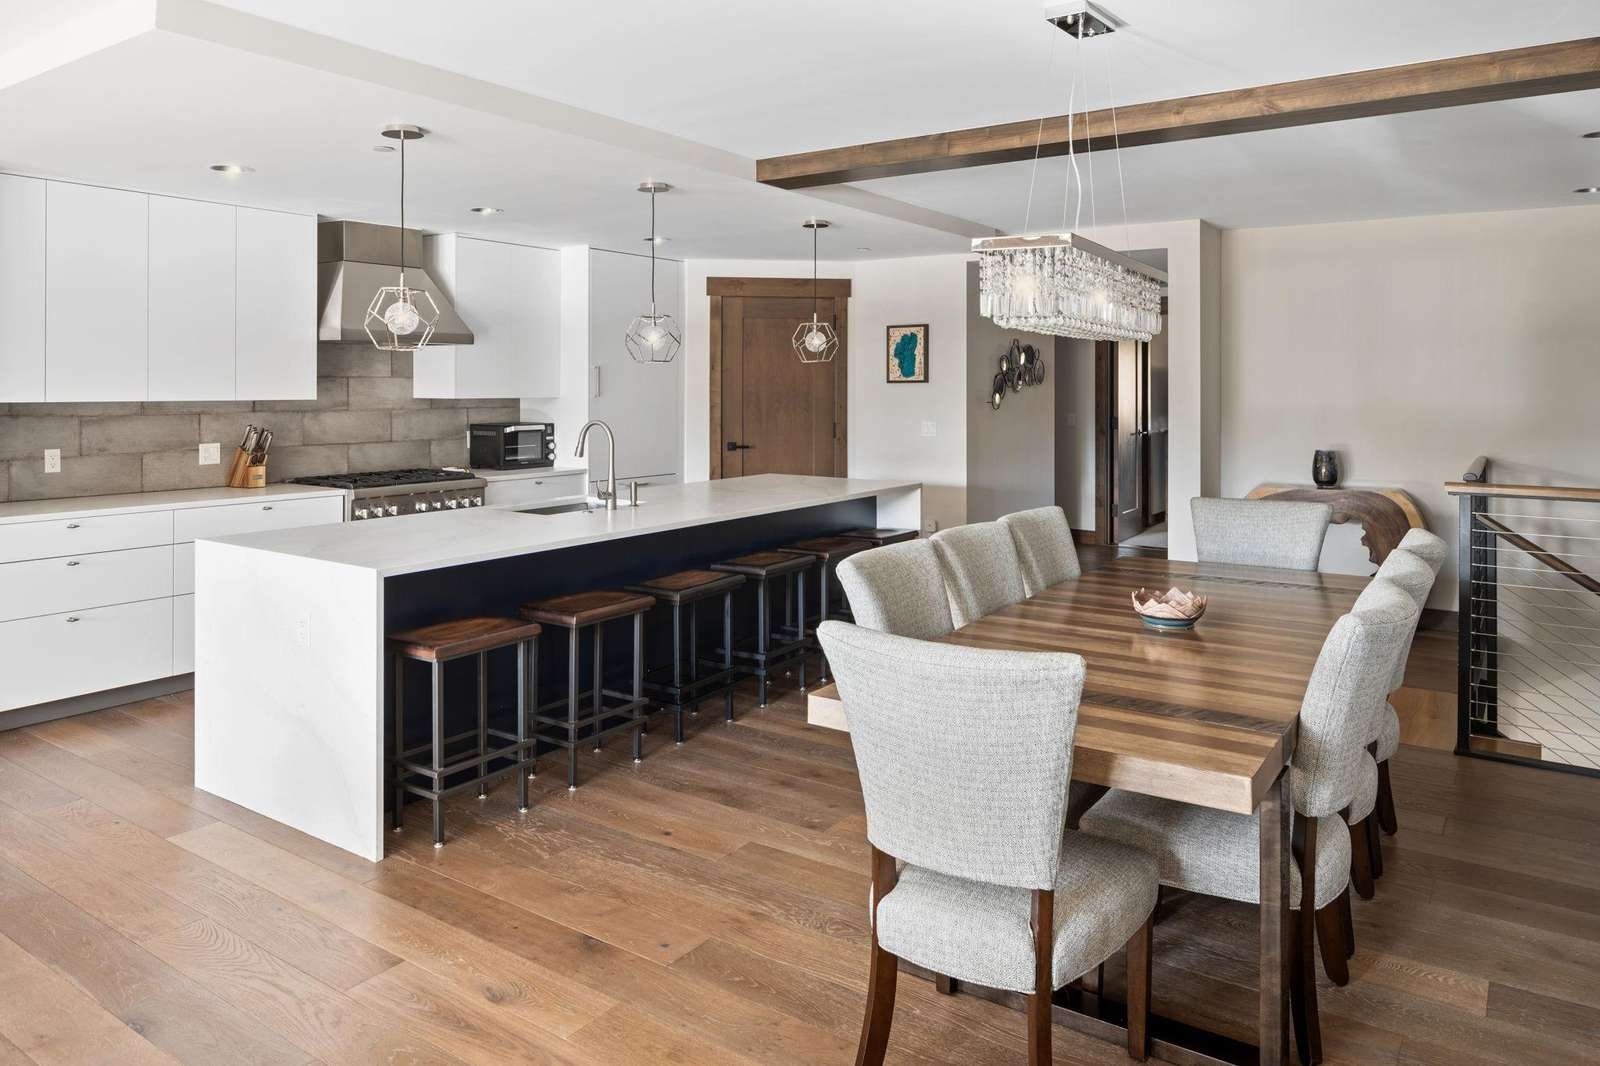 Modern kitchen and dining area featuring a large island, ideal for cooking and gathering with family.